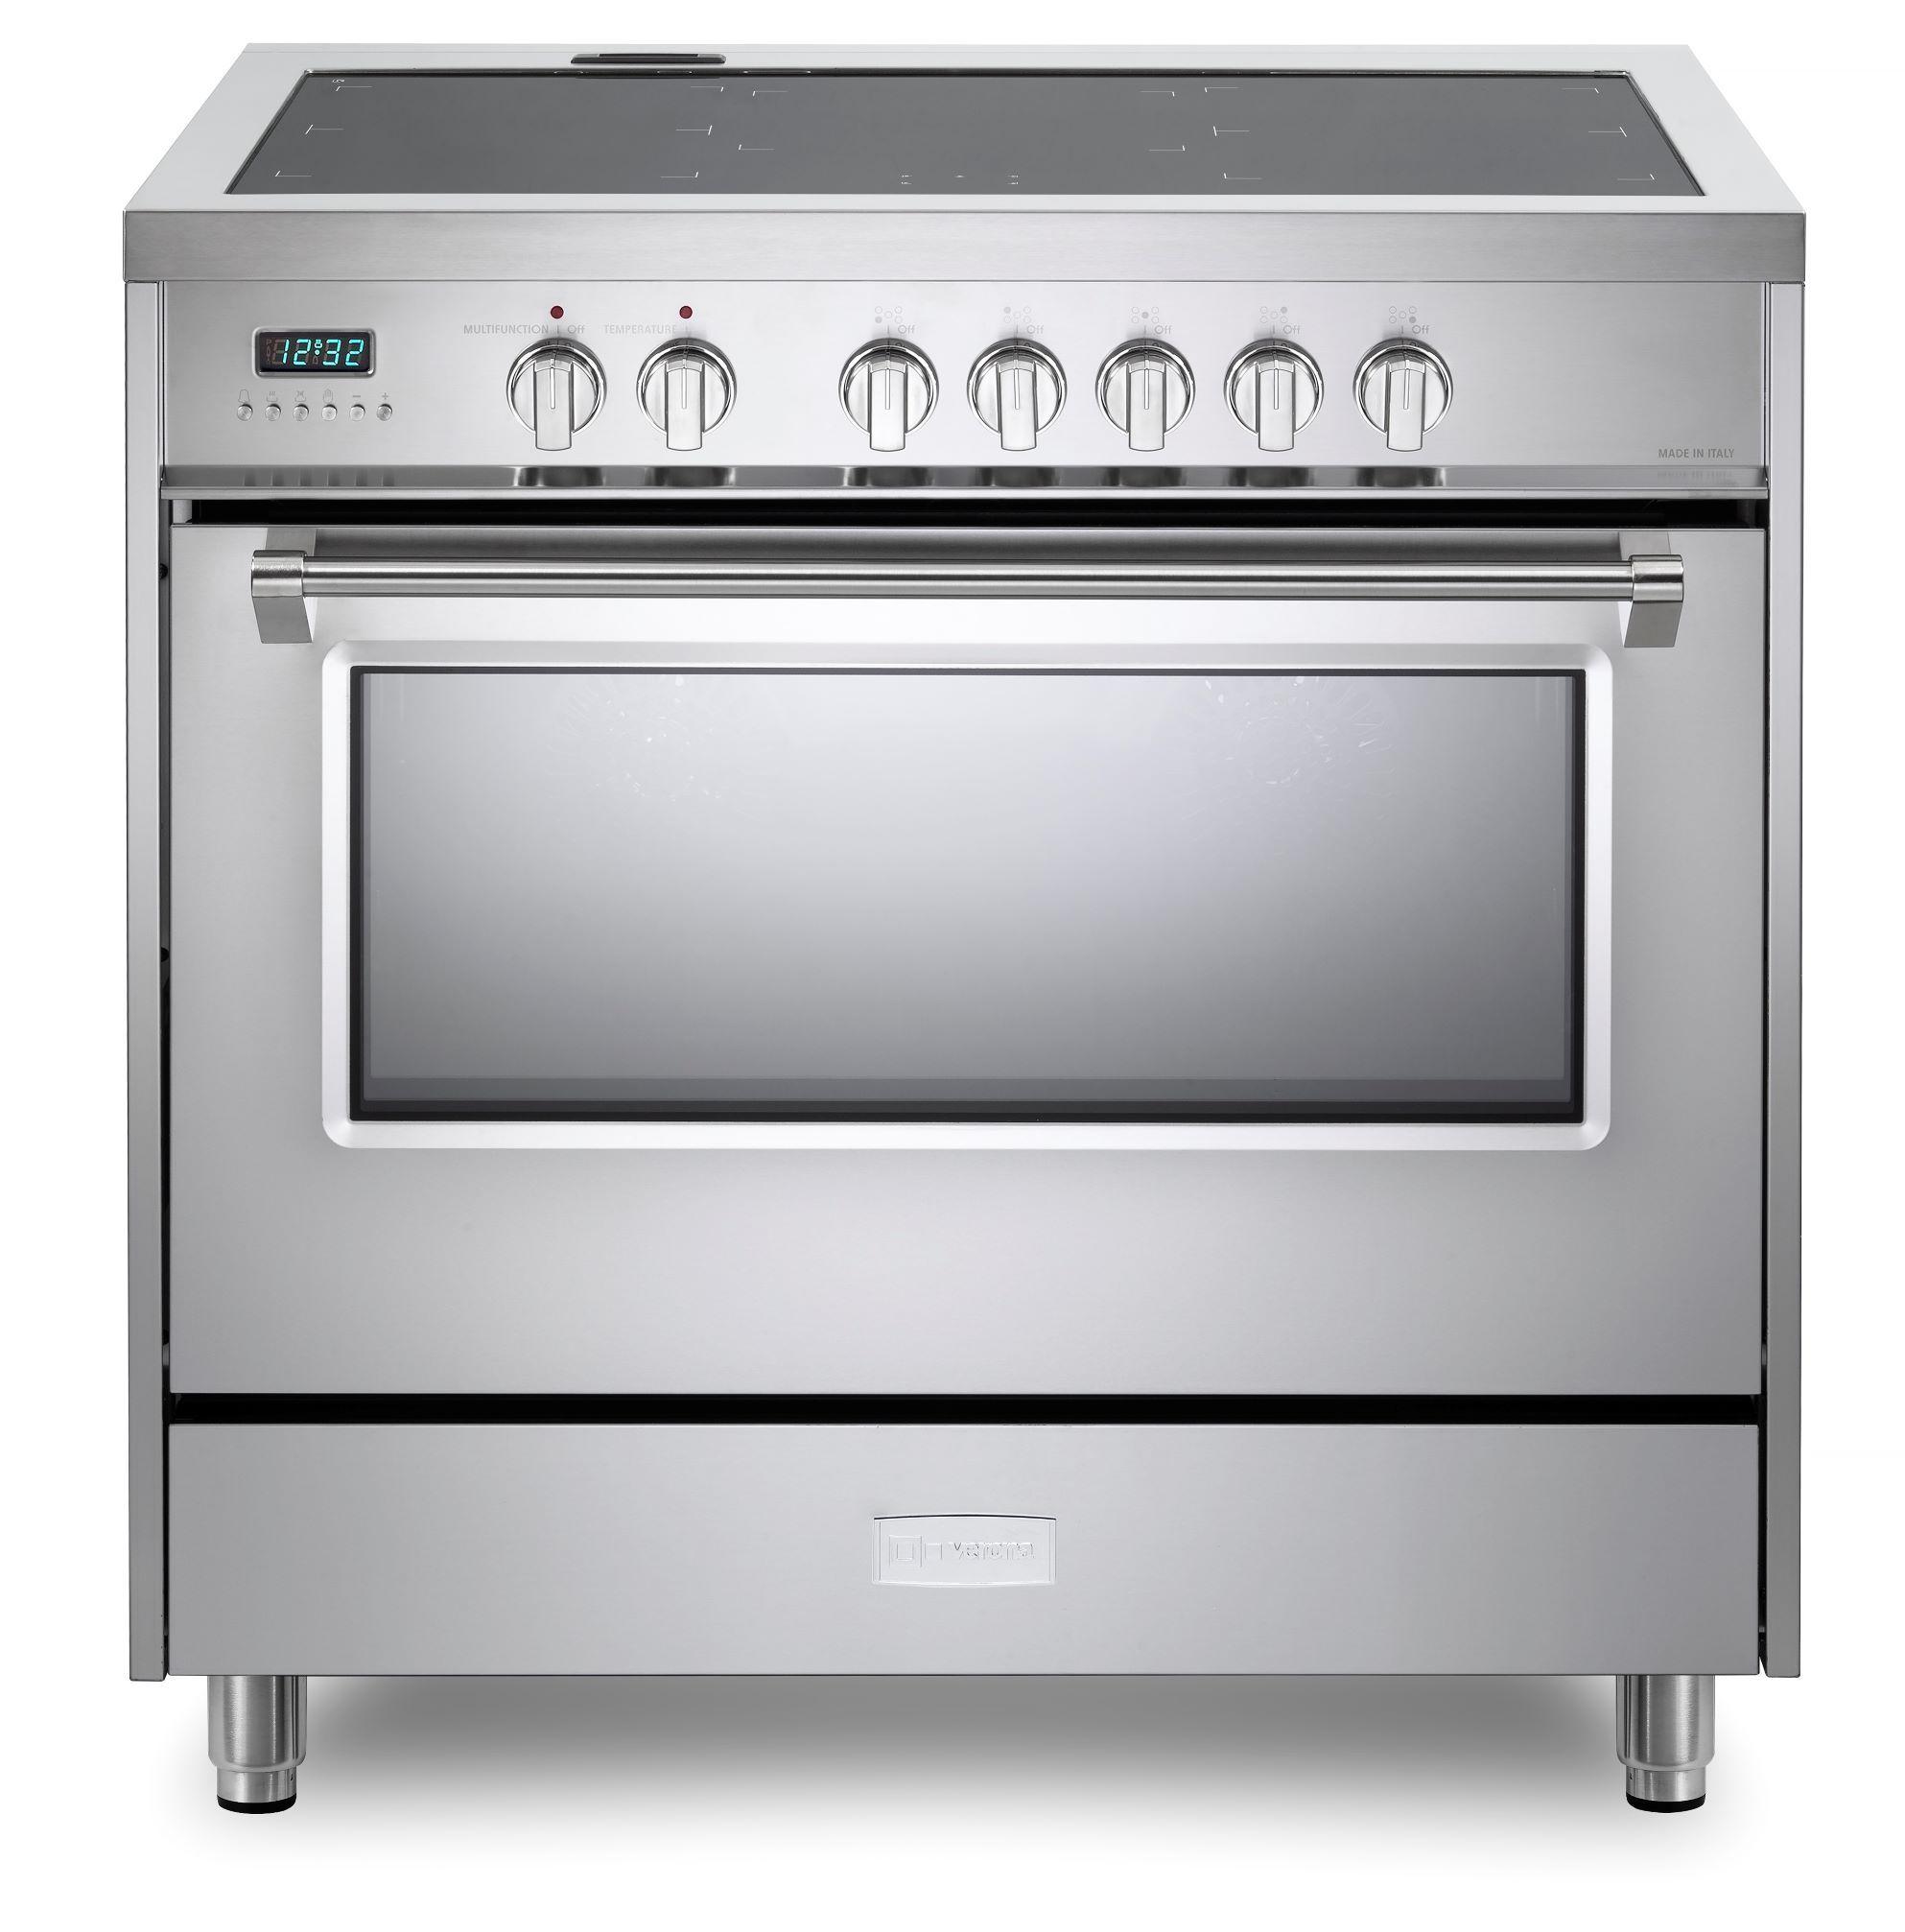 Designer 36" Induction Single Oven - Stainless Steel